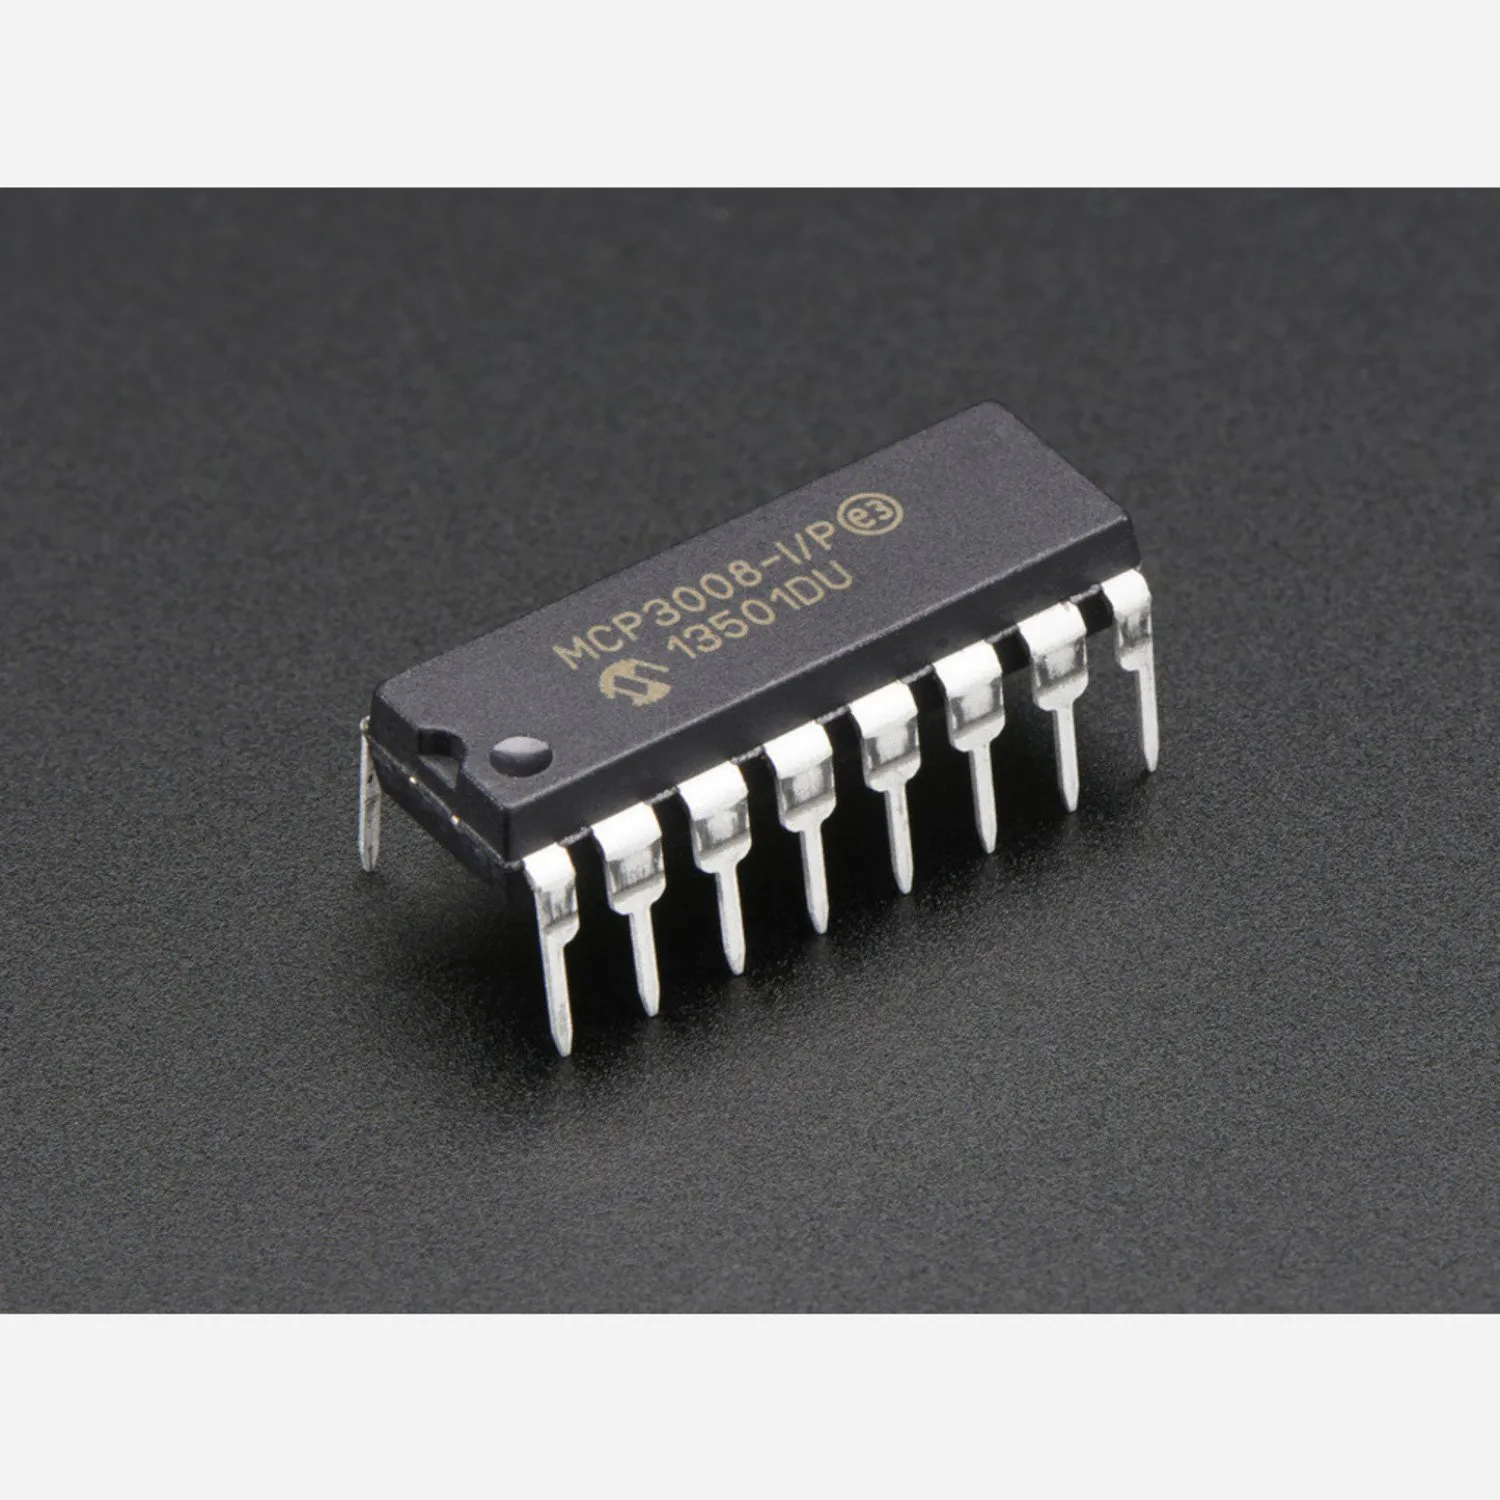 Photo of MCP3008 - 8-Channel 10-Bit ADC With SPI Interface